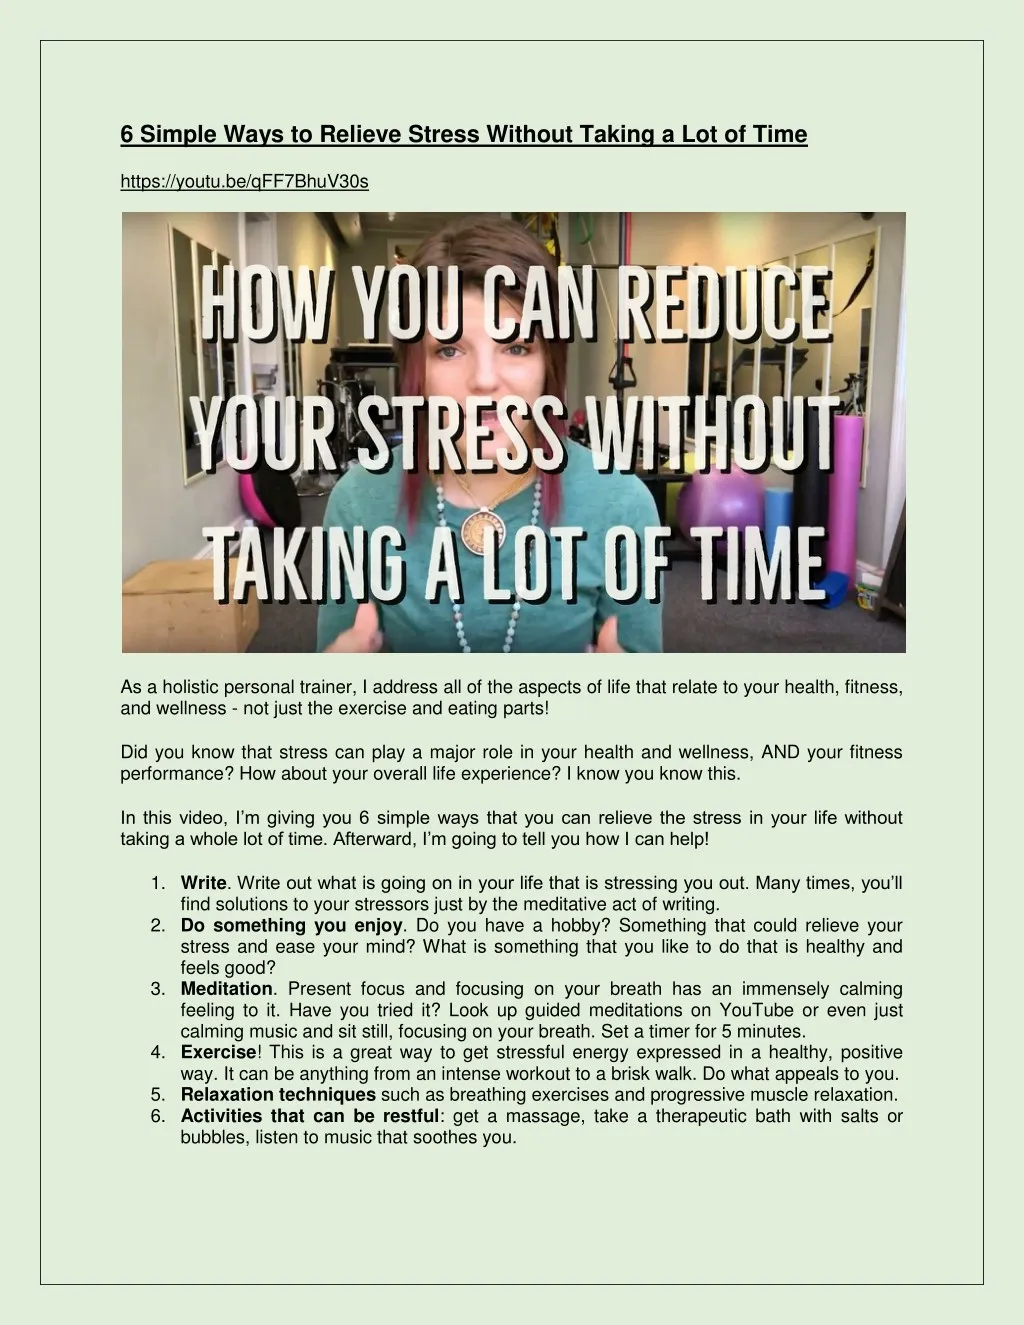 6 simple ways to relieve stress without taking